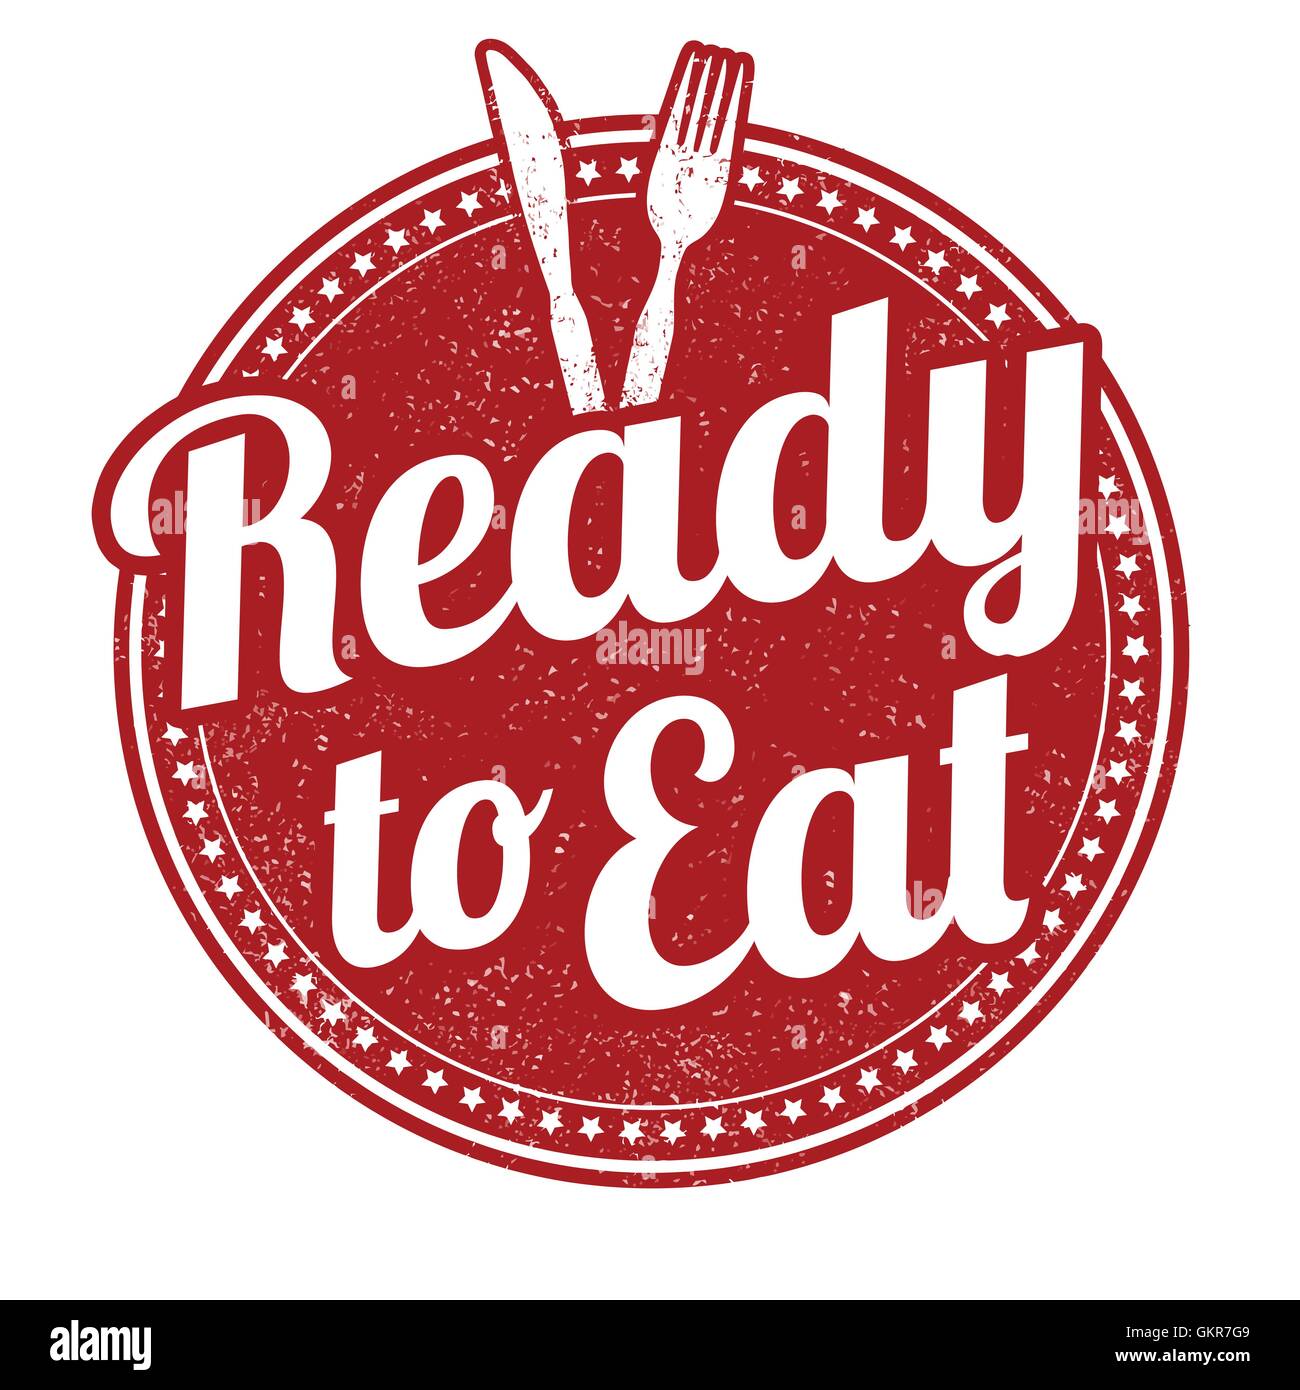 Ready to eat stamp Stock Vector